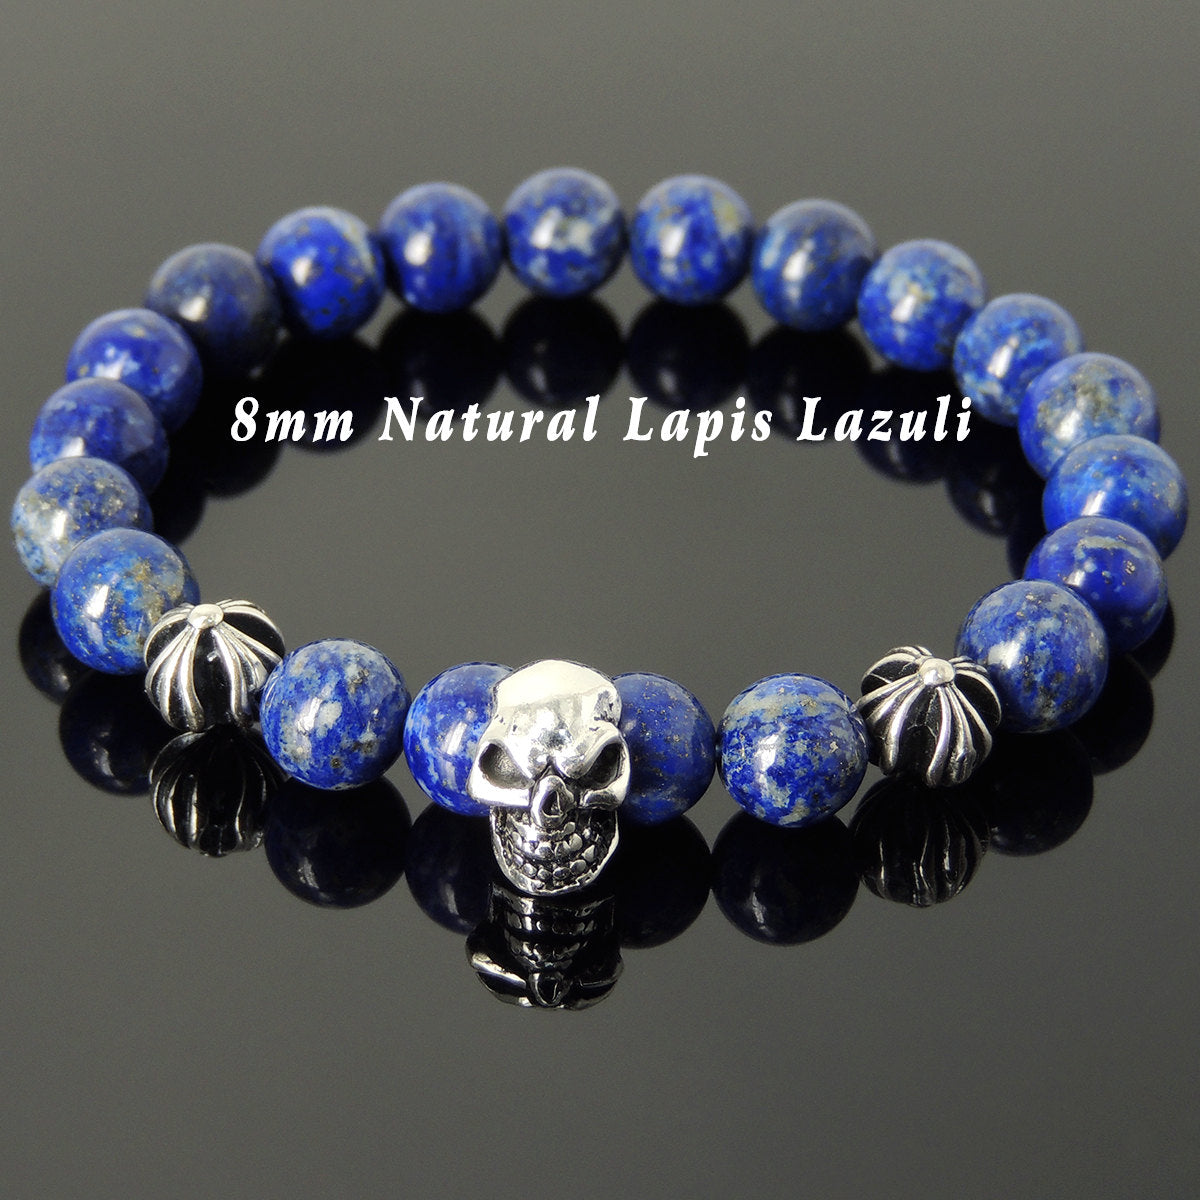 8mm Normal Grade Lapis Lazuli Healing Gemstone Bracelet with S925 Sterling Silver Protective Skull & Cross Beads- Handmade by Gem & Silver BR756